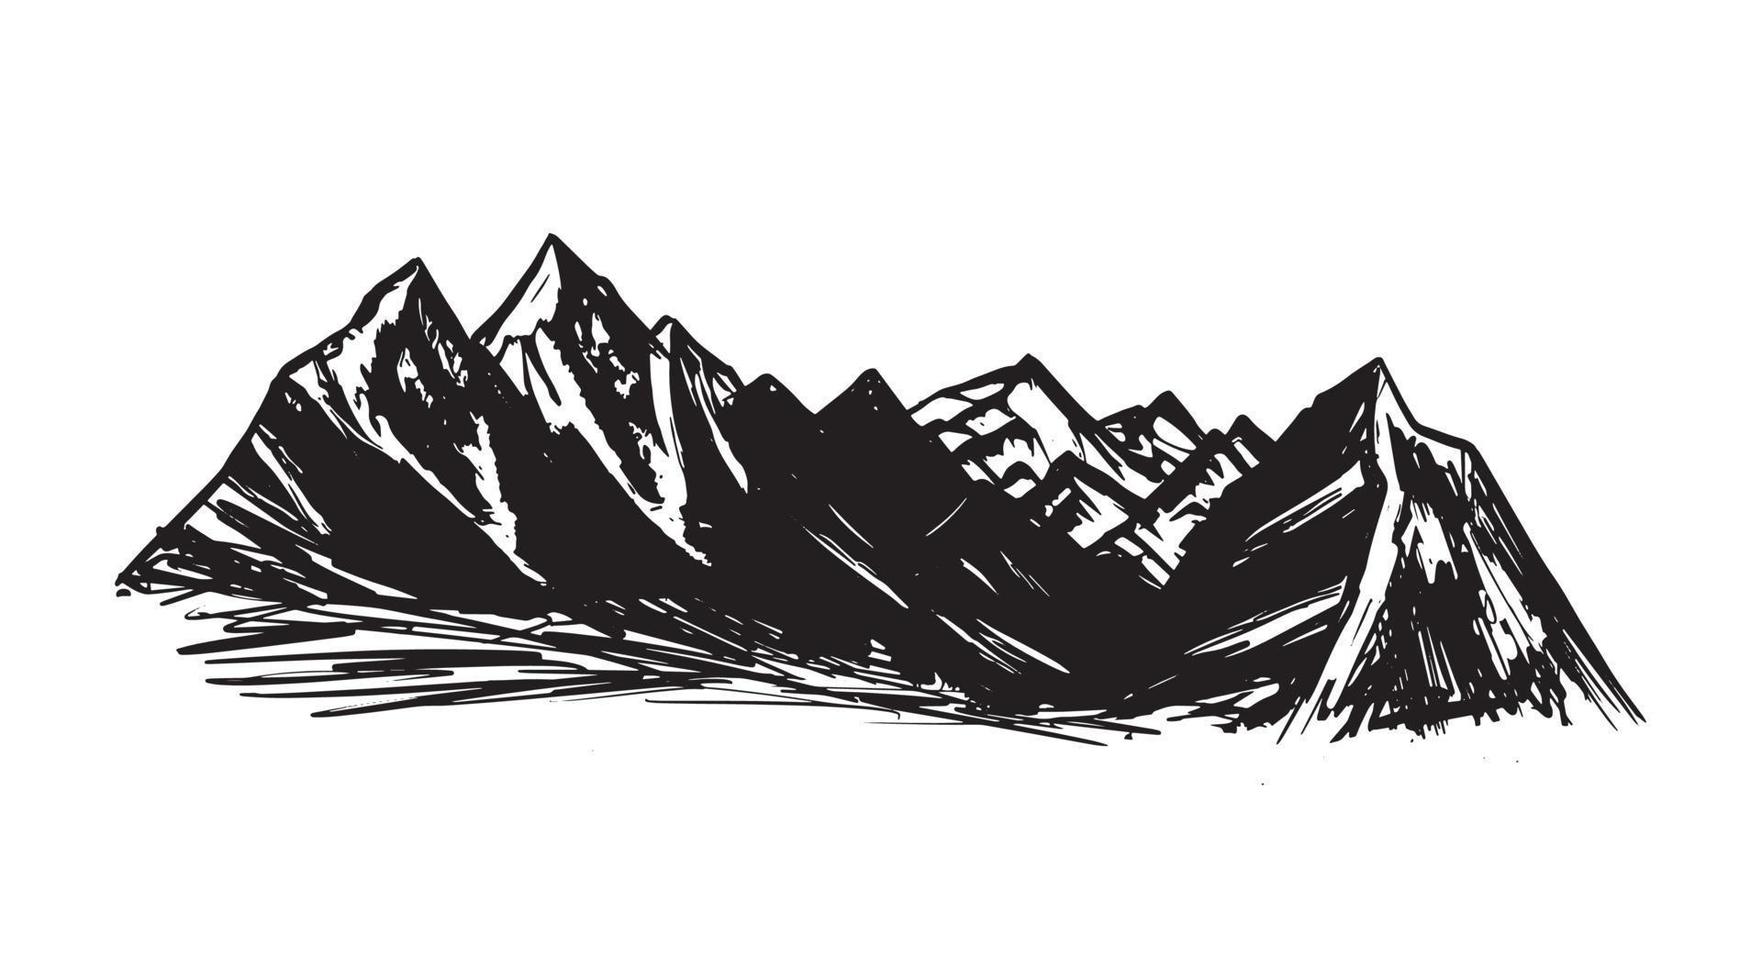 Rocky mountains, hand drawn style, vector illustration